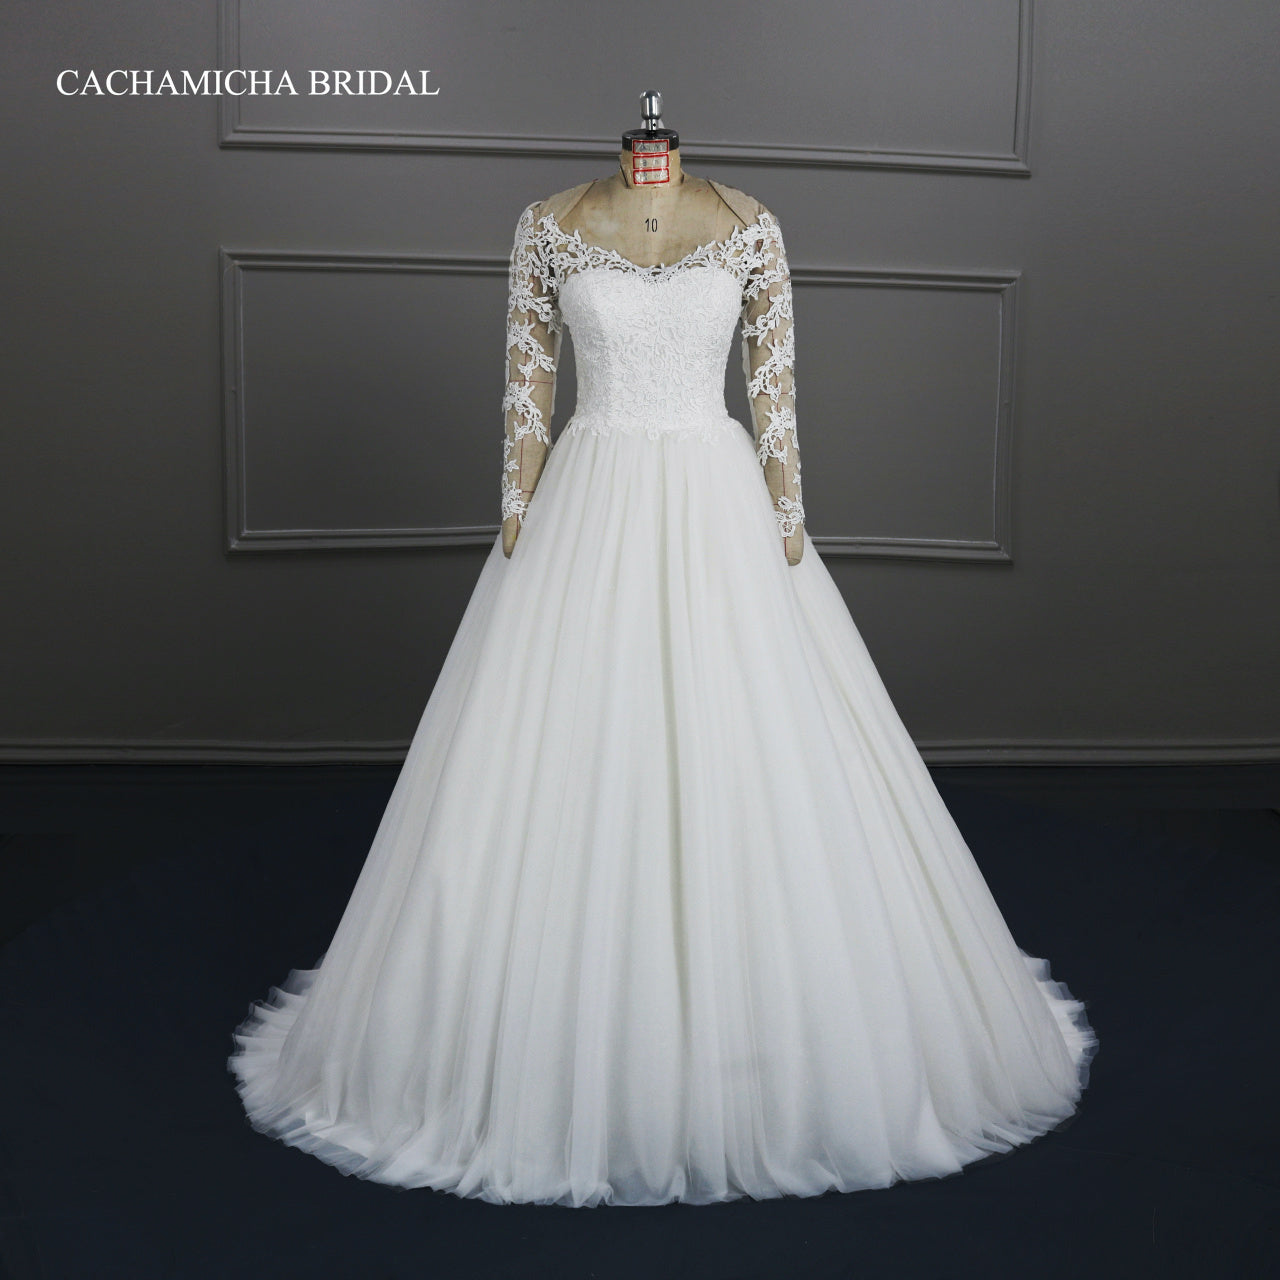 V Neck Guipure Lace Ball Gown Wedding Dress DW29